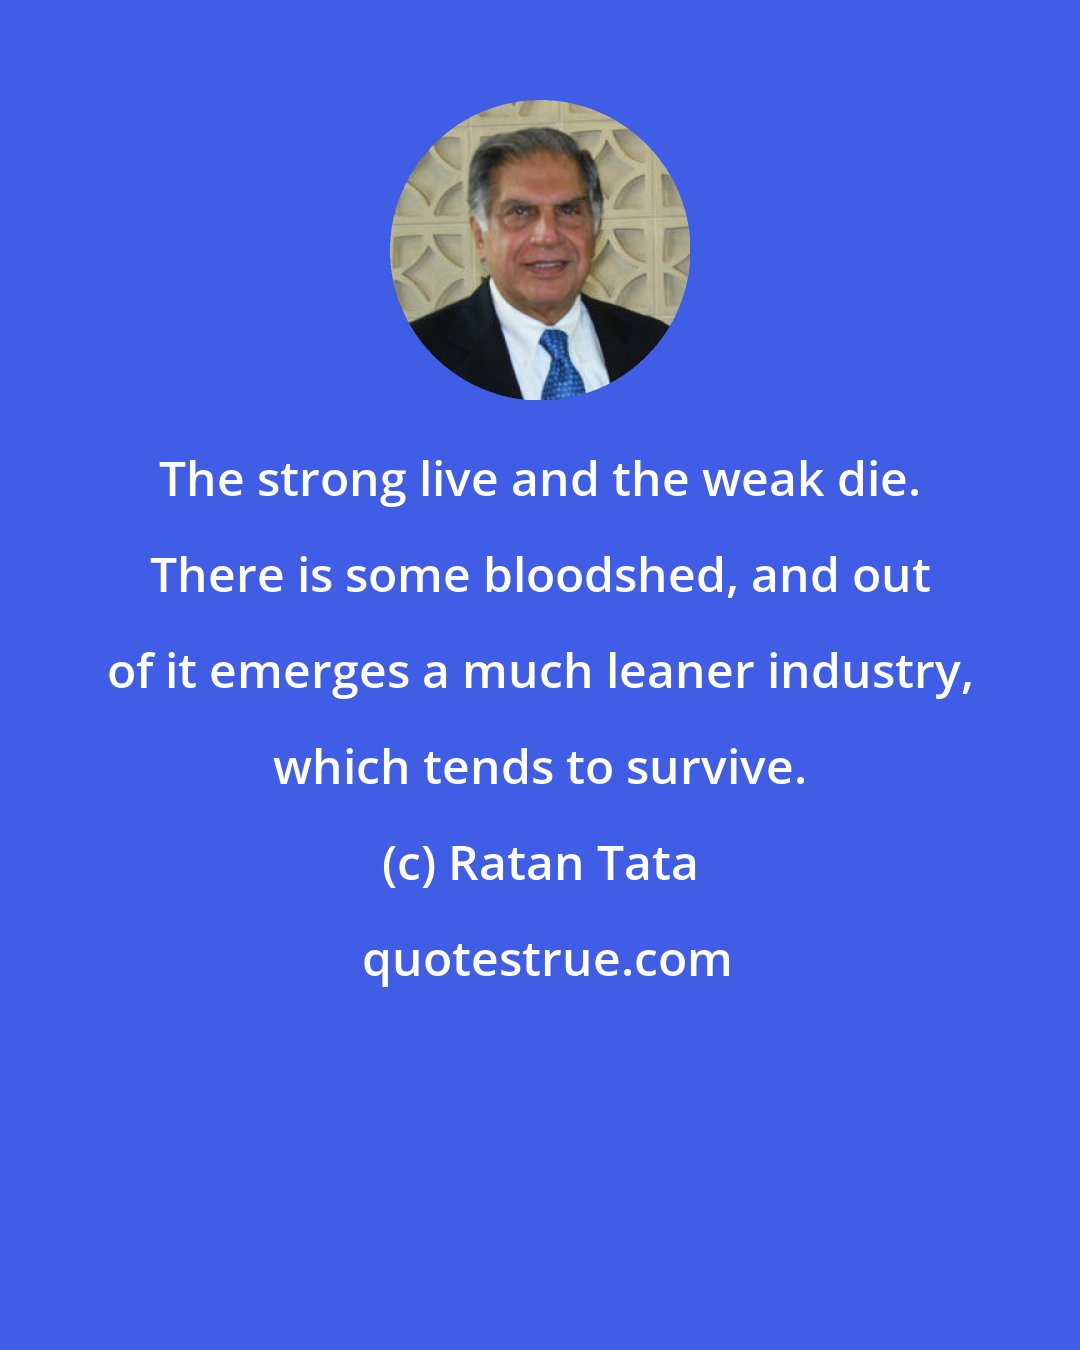 Ratan Tata: The strong live and the weak die. There is some bloodshed, and out of it emerges a much leaner industry, which tends to survive.